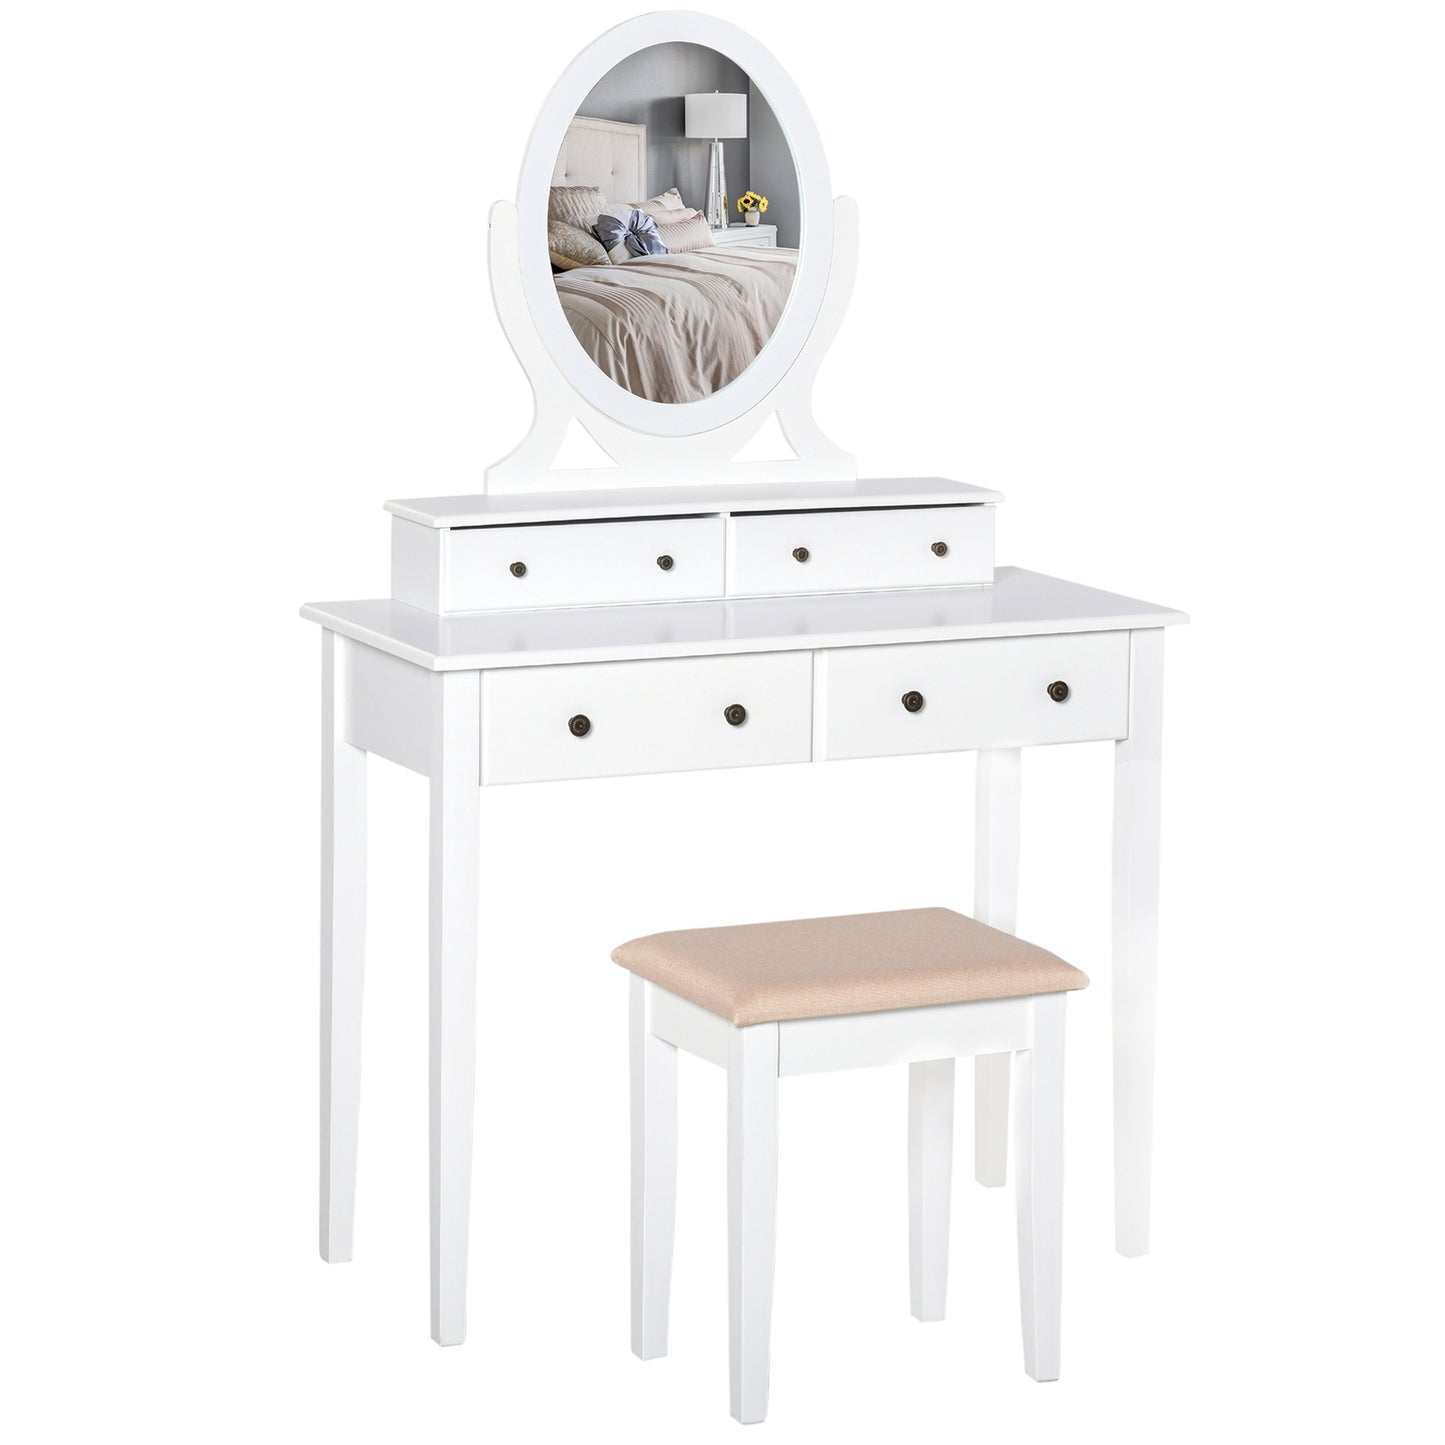 HOMCOM Dressing Table Set with 360° Spin Mirror Cushioned Stool 4 Drawers Makeup Desk